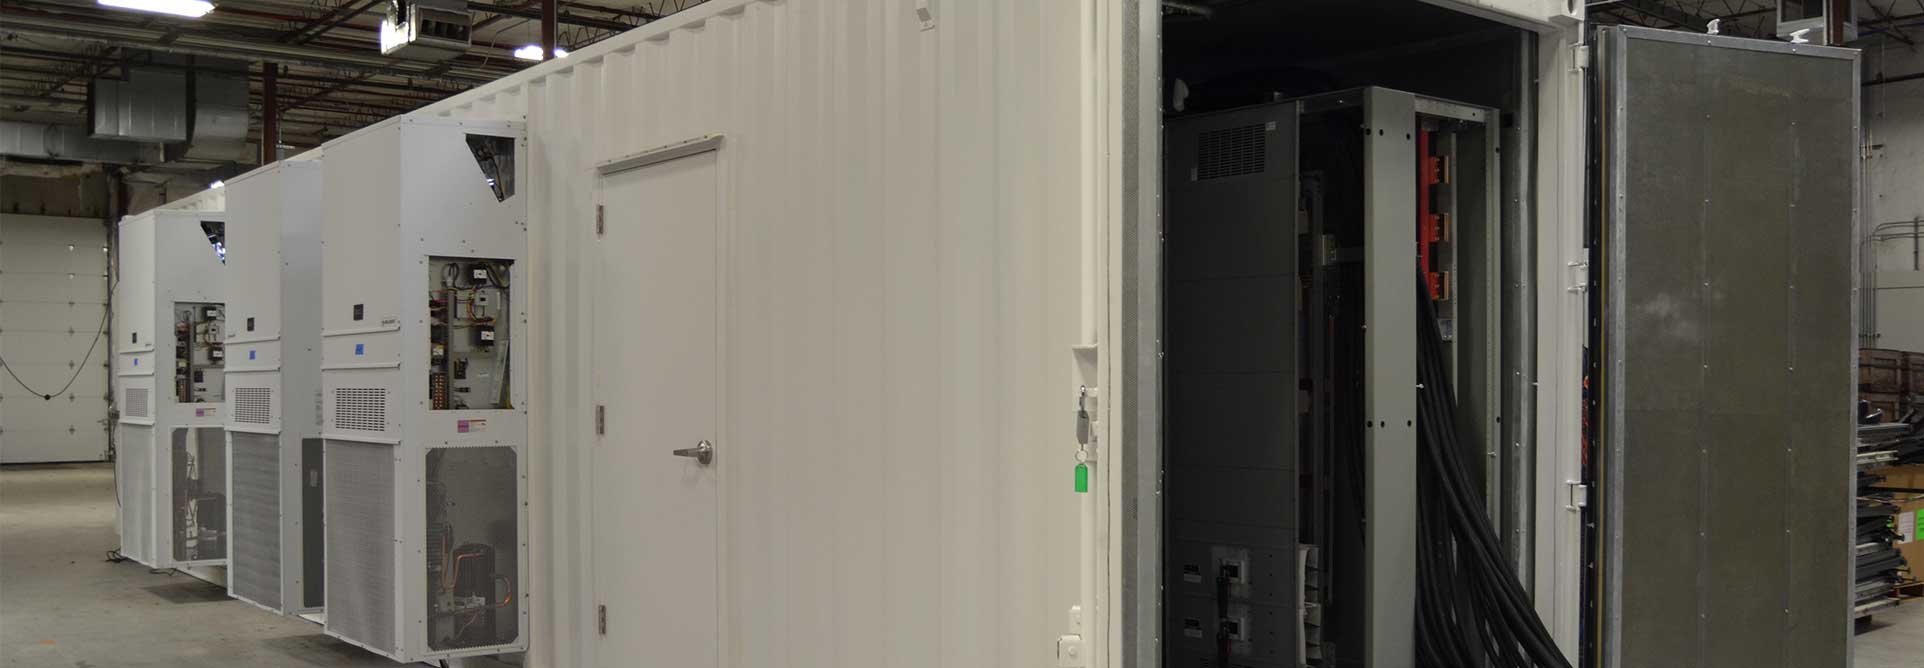 modular_equipment_shelters_for_ups_systems_interior_case_study